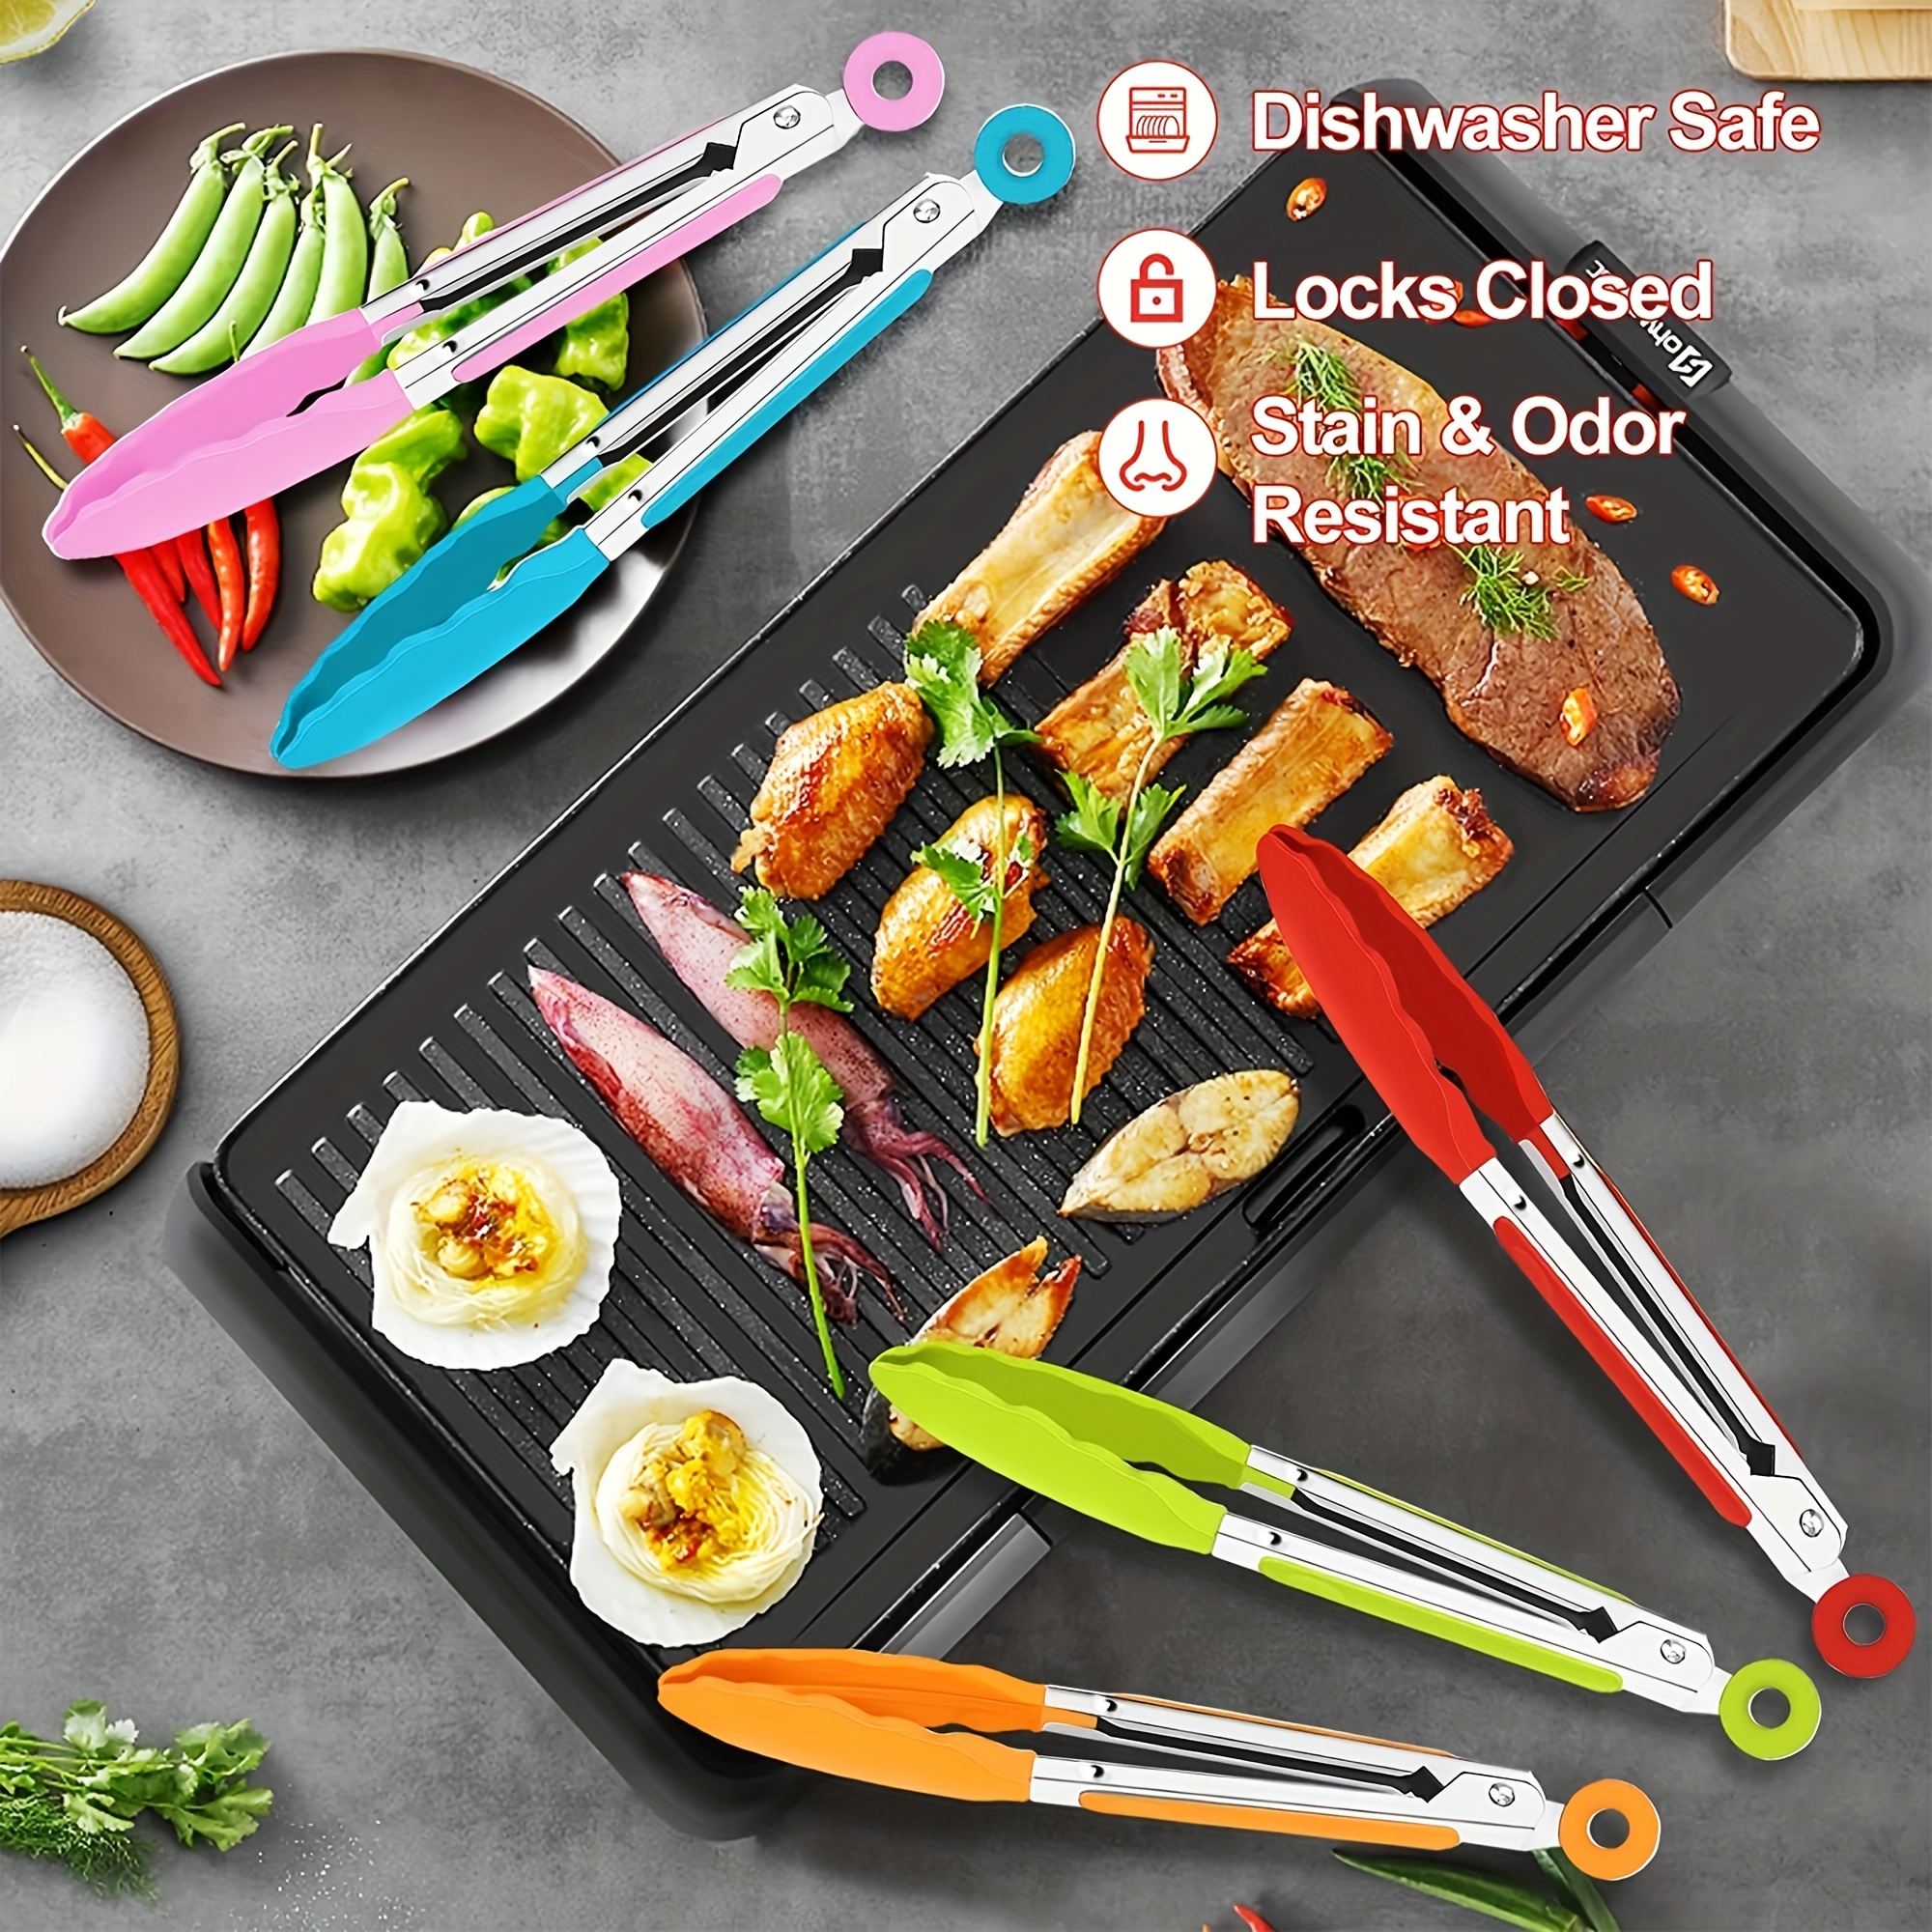 Silicone Kitchen Tongs for Cooking with Silicone Tips, Heat Resistant Tongs  for Serving Food, 7-Inch, 9-Inch, 12-Inch Locking Silicone Tongs, Set of 3